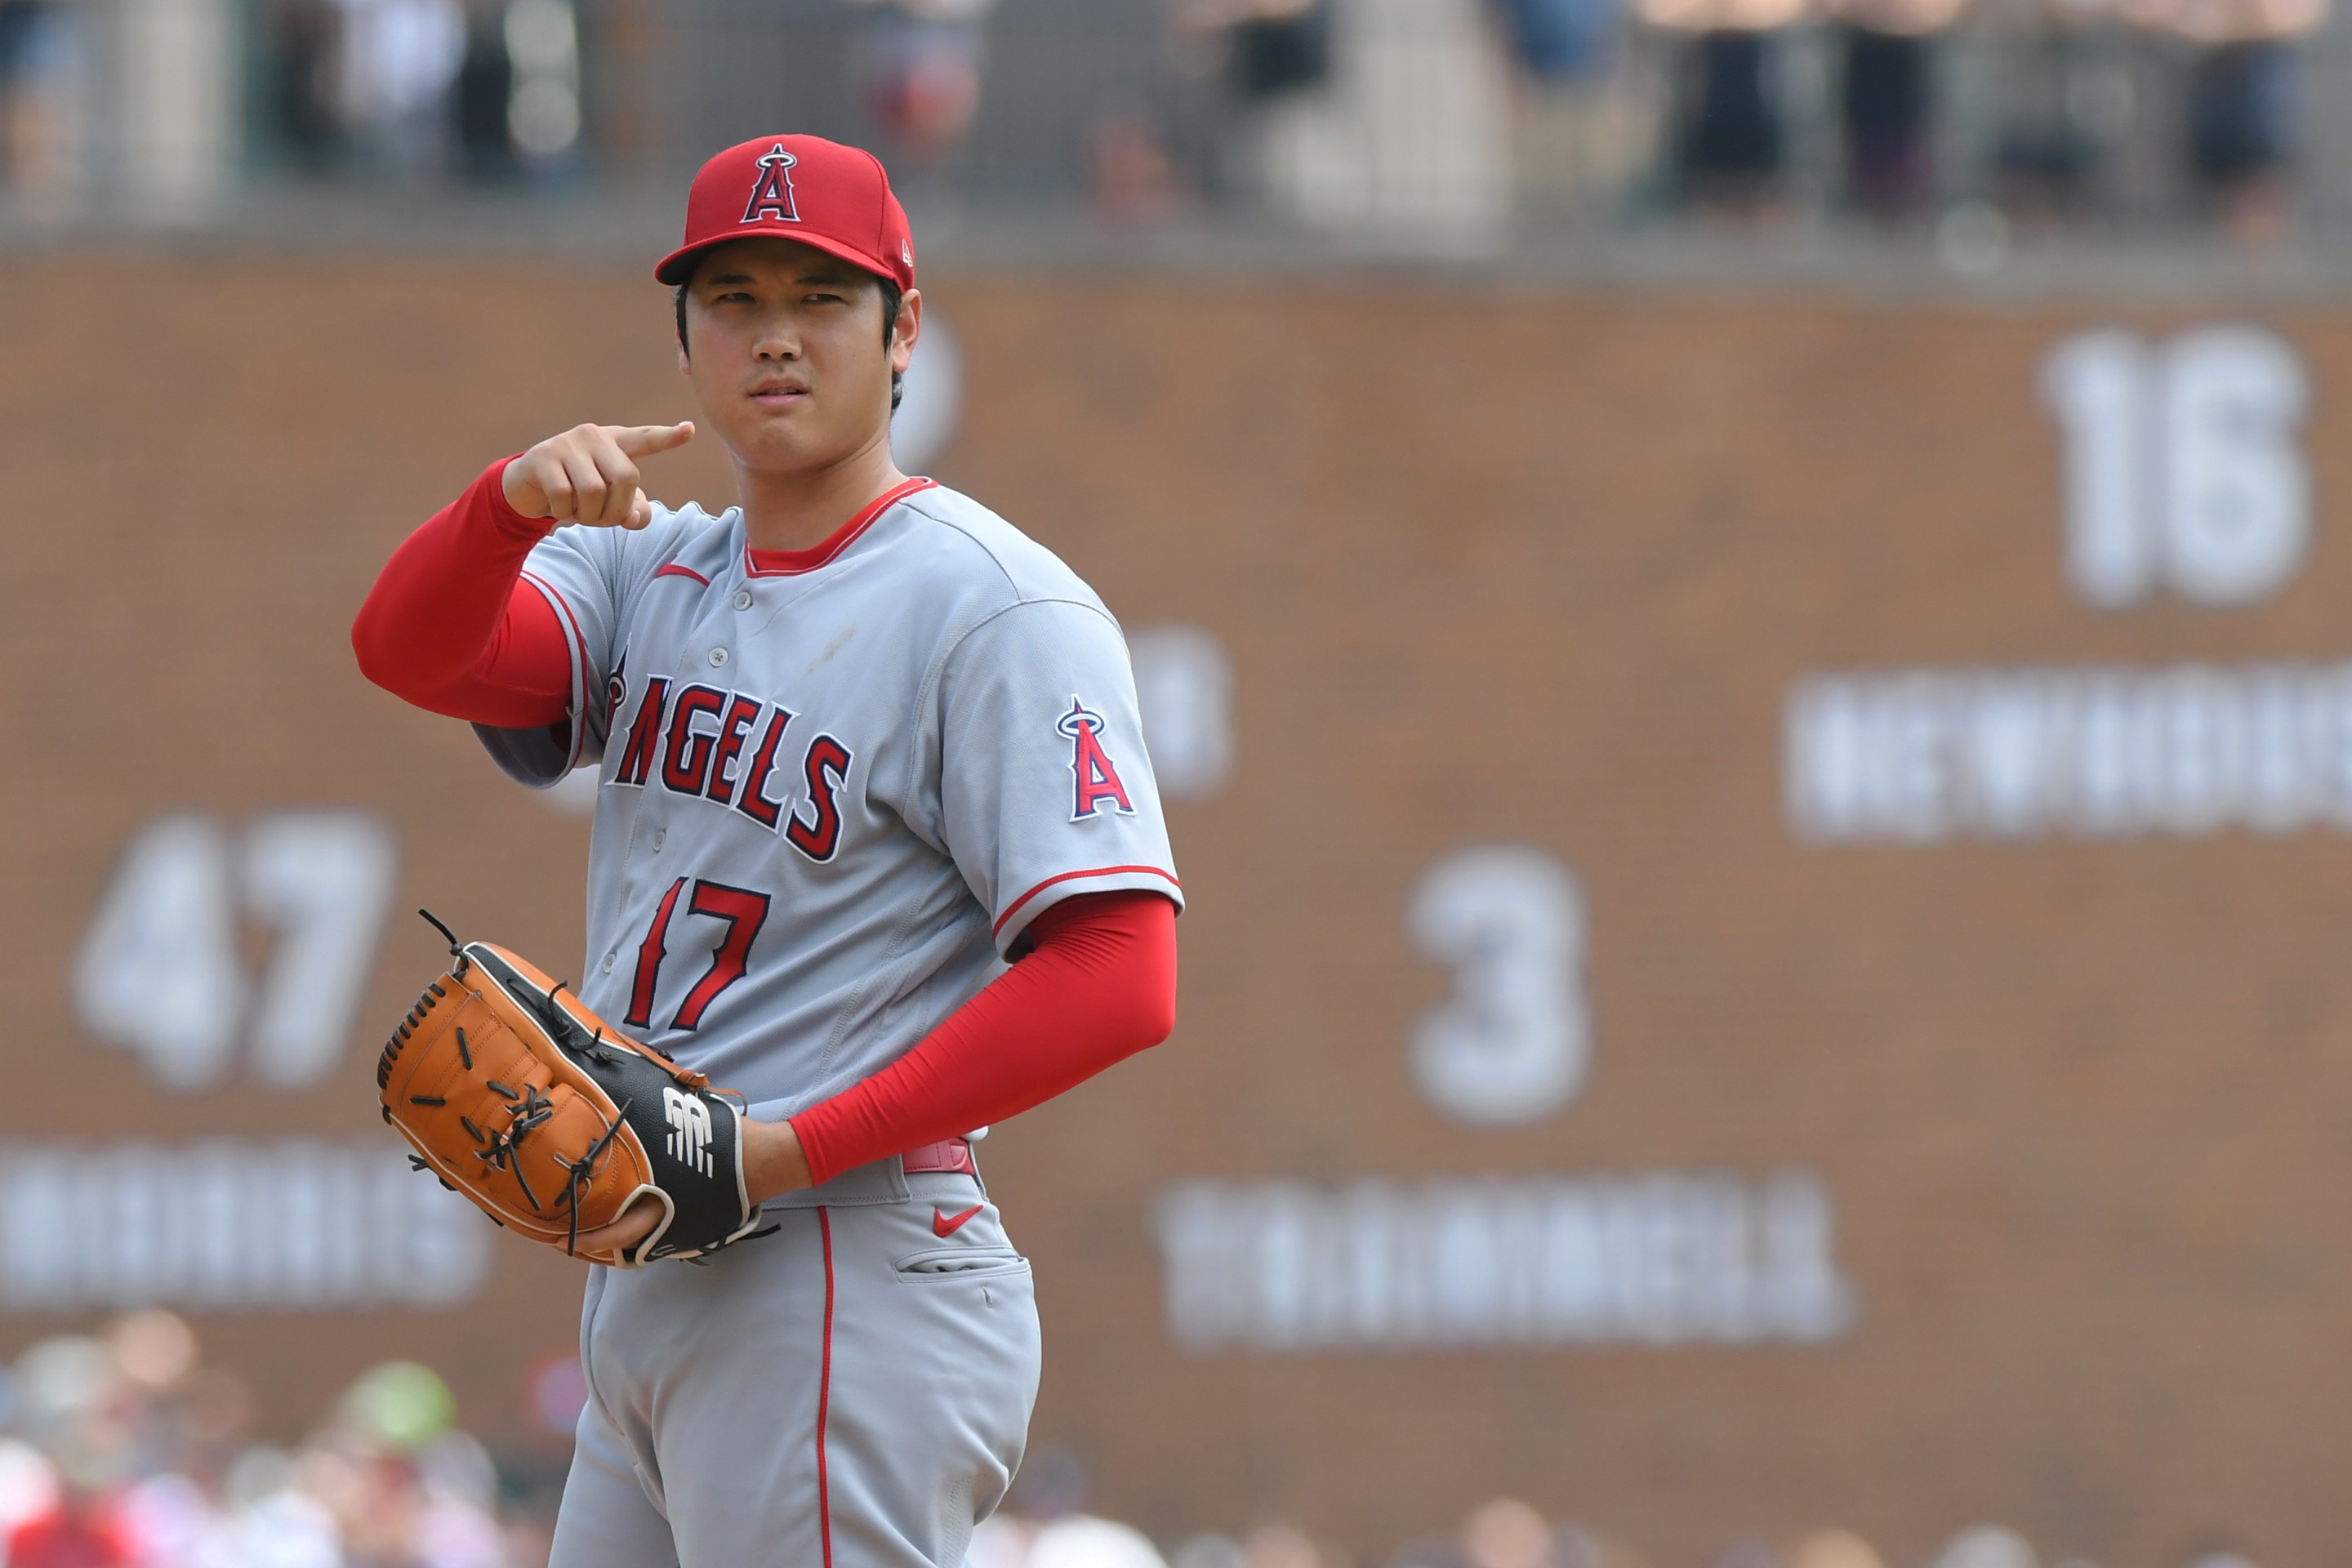 Shohei Ohtani #17 of the Los Angeles Angels looks on from the pitchers mound in the bottom of the 2nd inning of game one of a doubleheader against the Detroit Tigers at Comerica Park on July 27, 2023 in Detroit, Michigan. The Angels defeated the Tigers 6-0. Ohtani pitched a complete game, one-hit shutout.